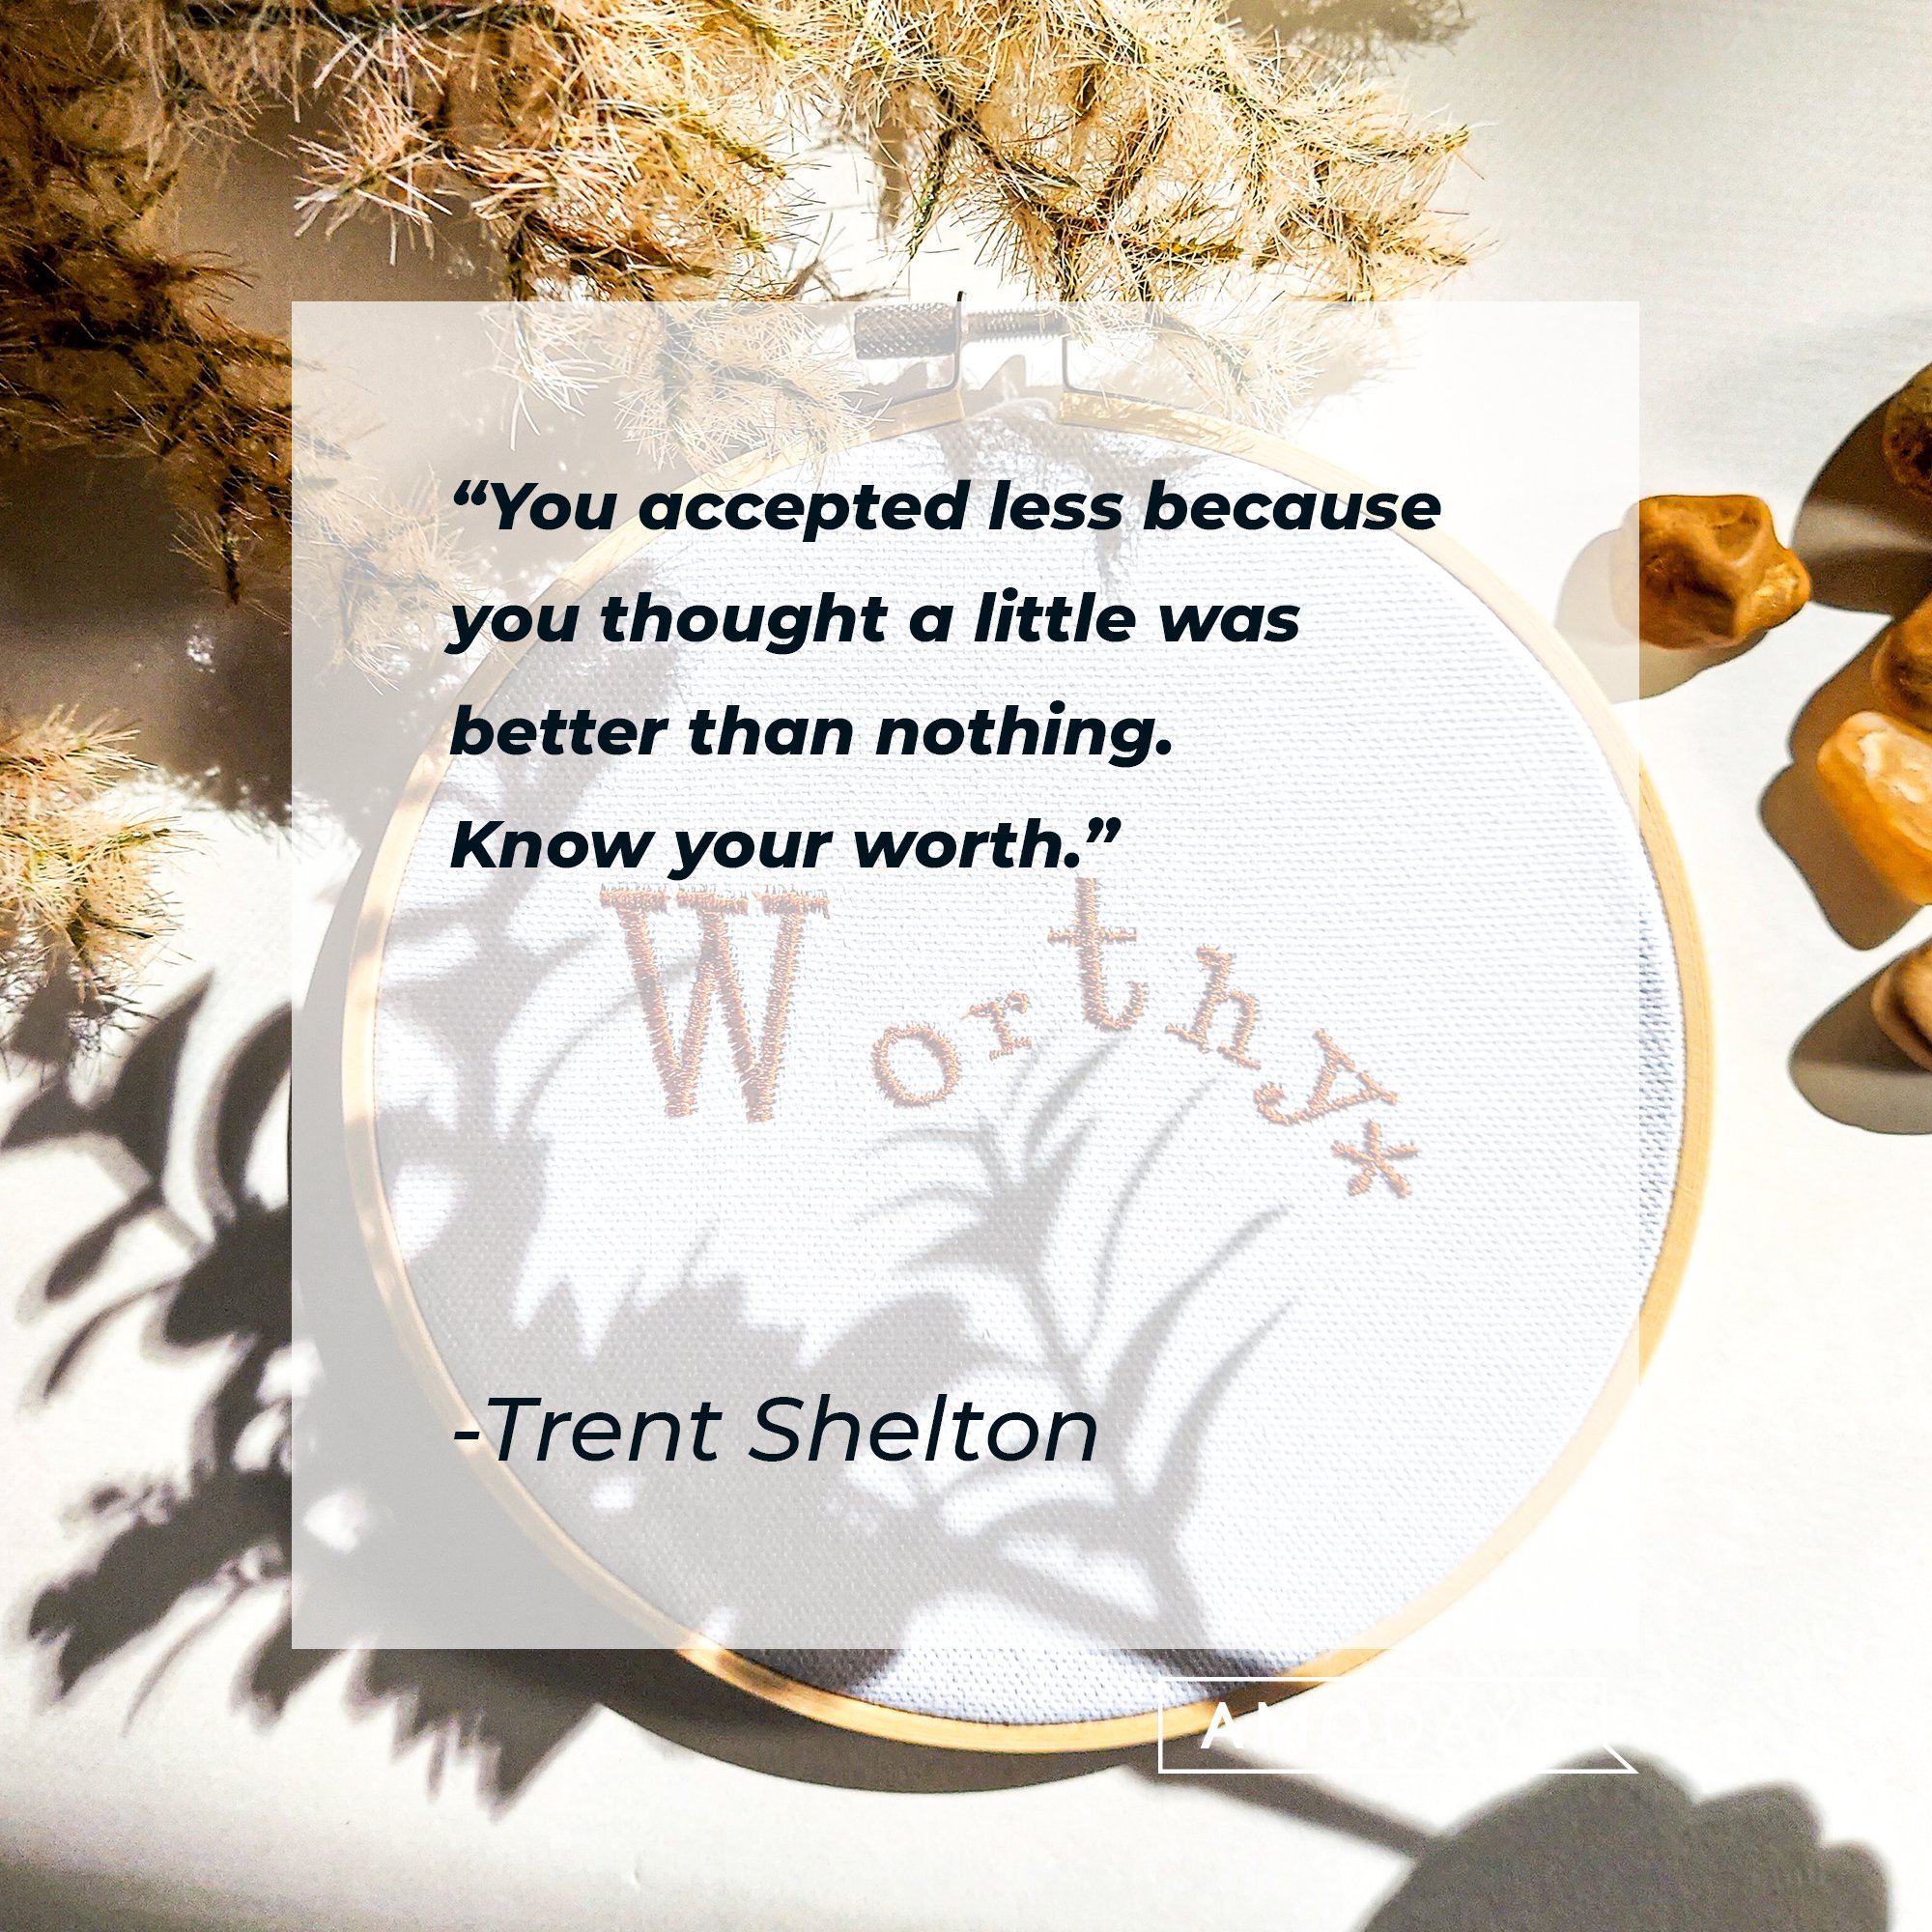 Trent Shelton's quote: "You accepted less because you thought a little was better than nothing. Know your worth." | Image: AmoDays